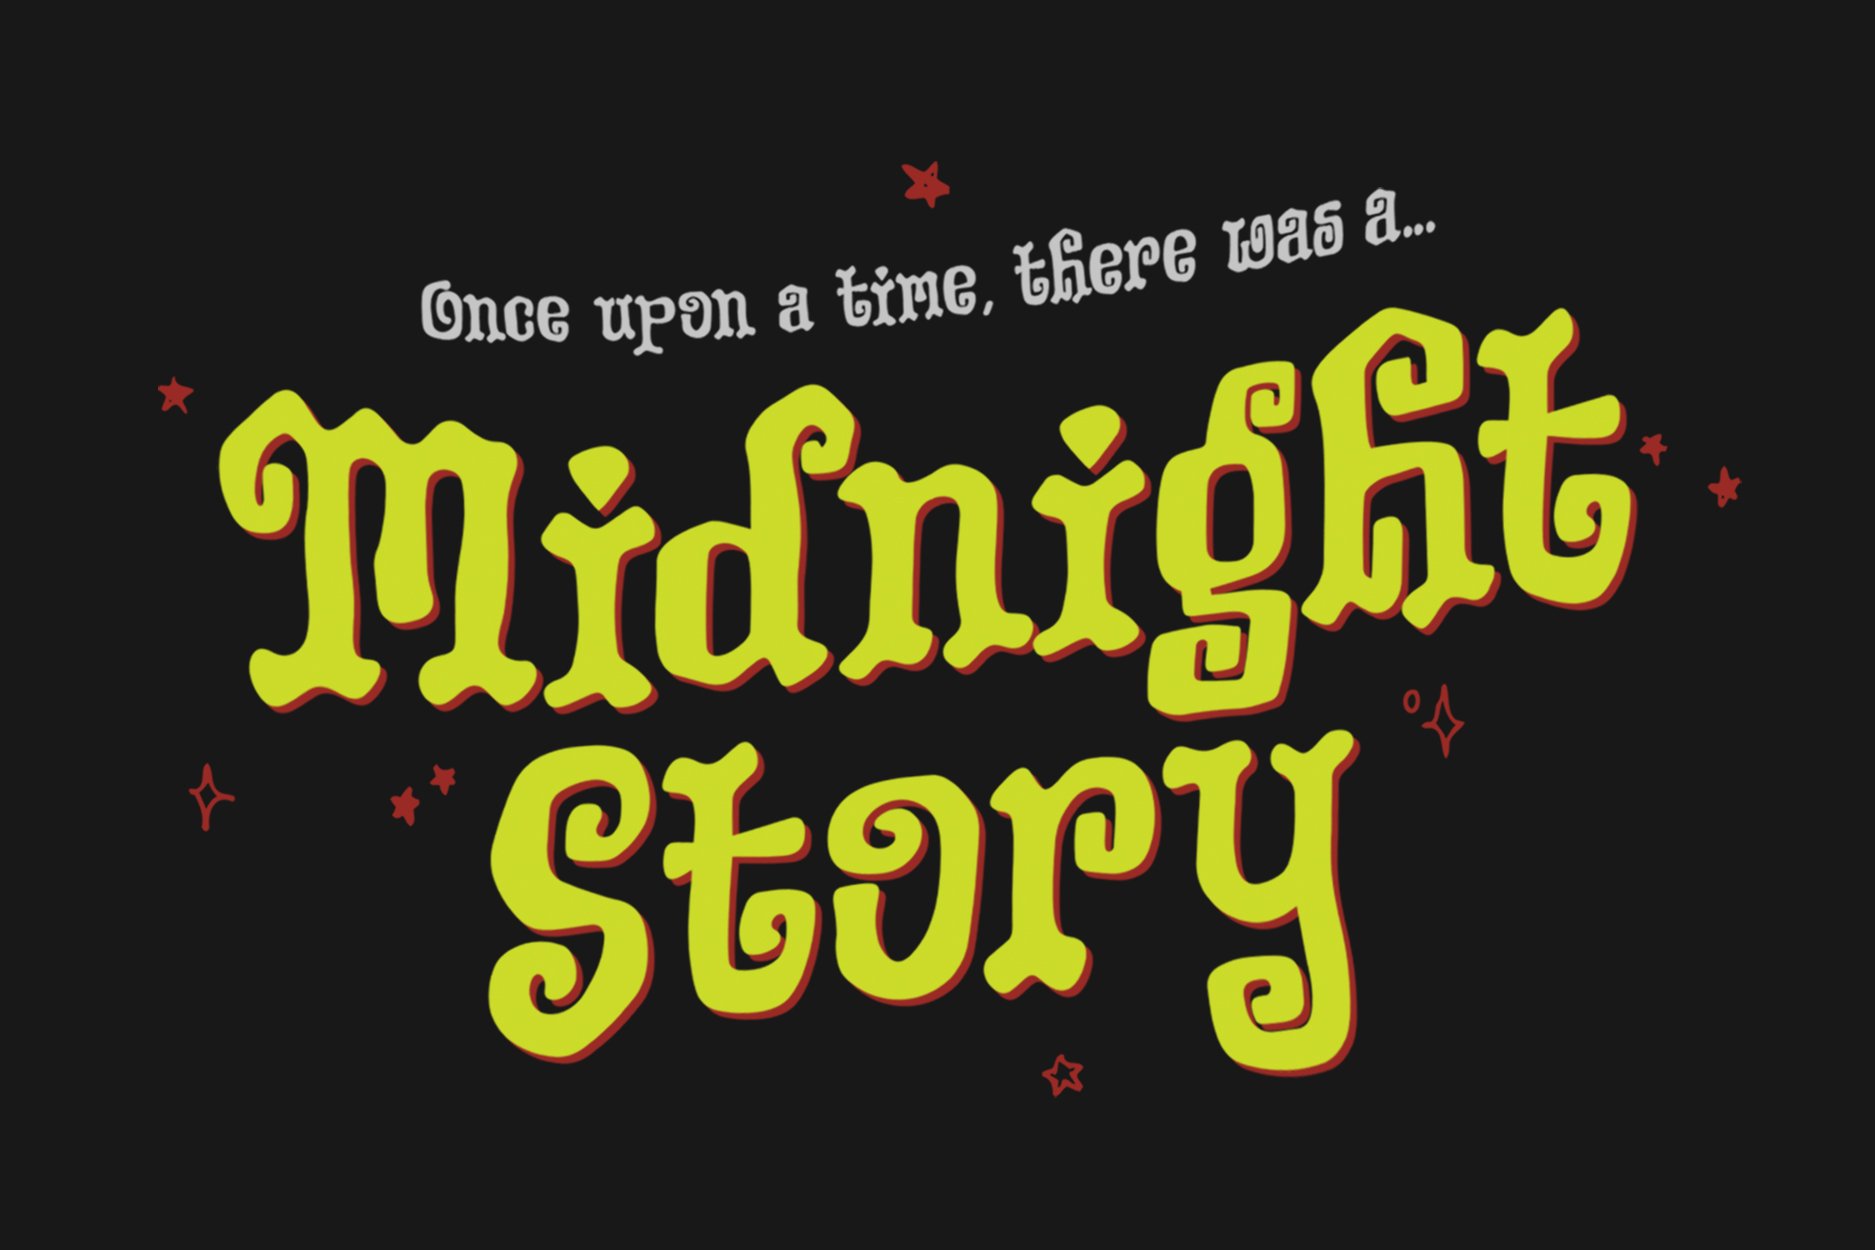 Midnight Story cover image.